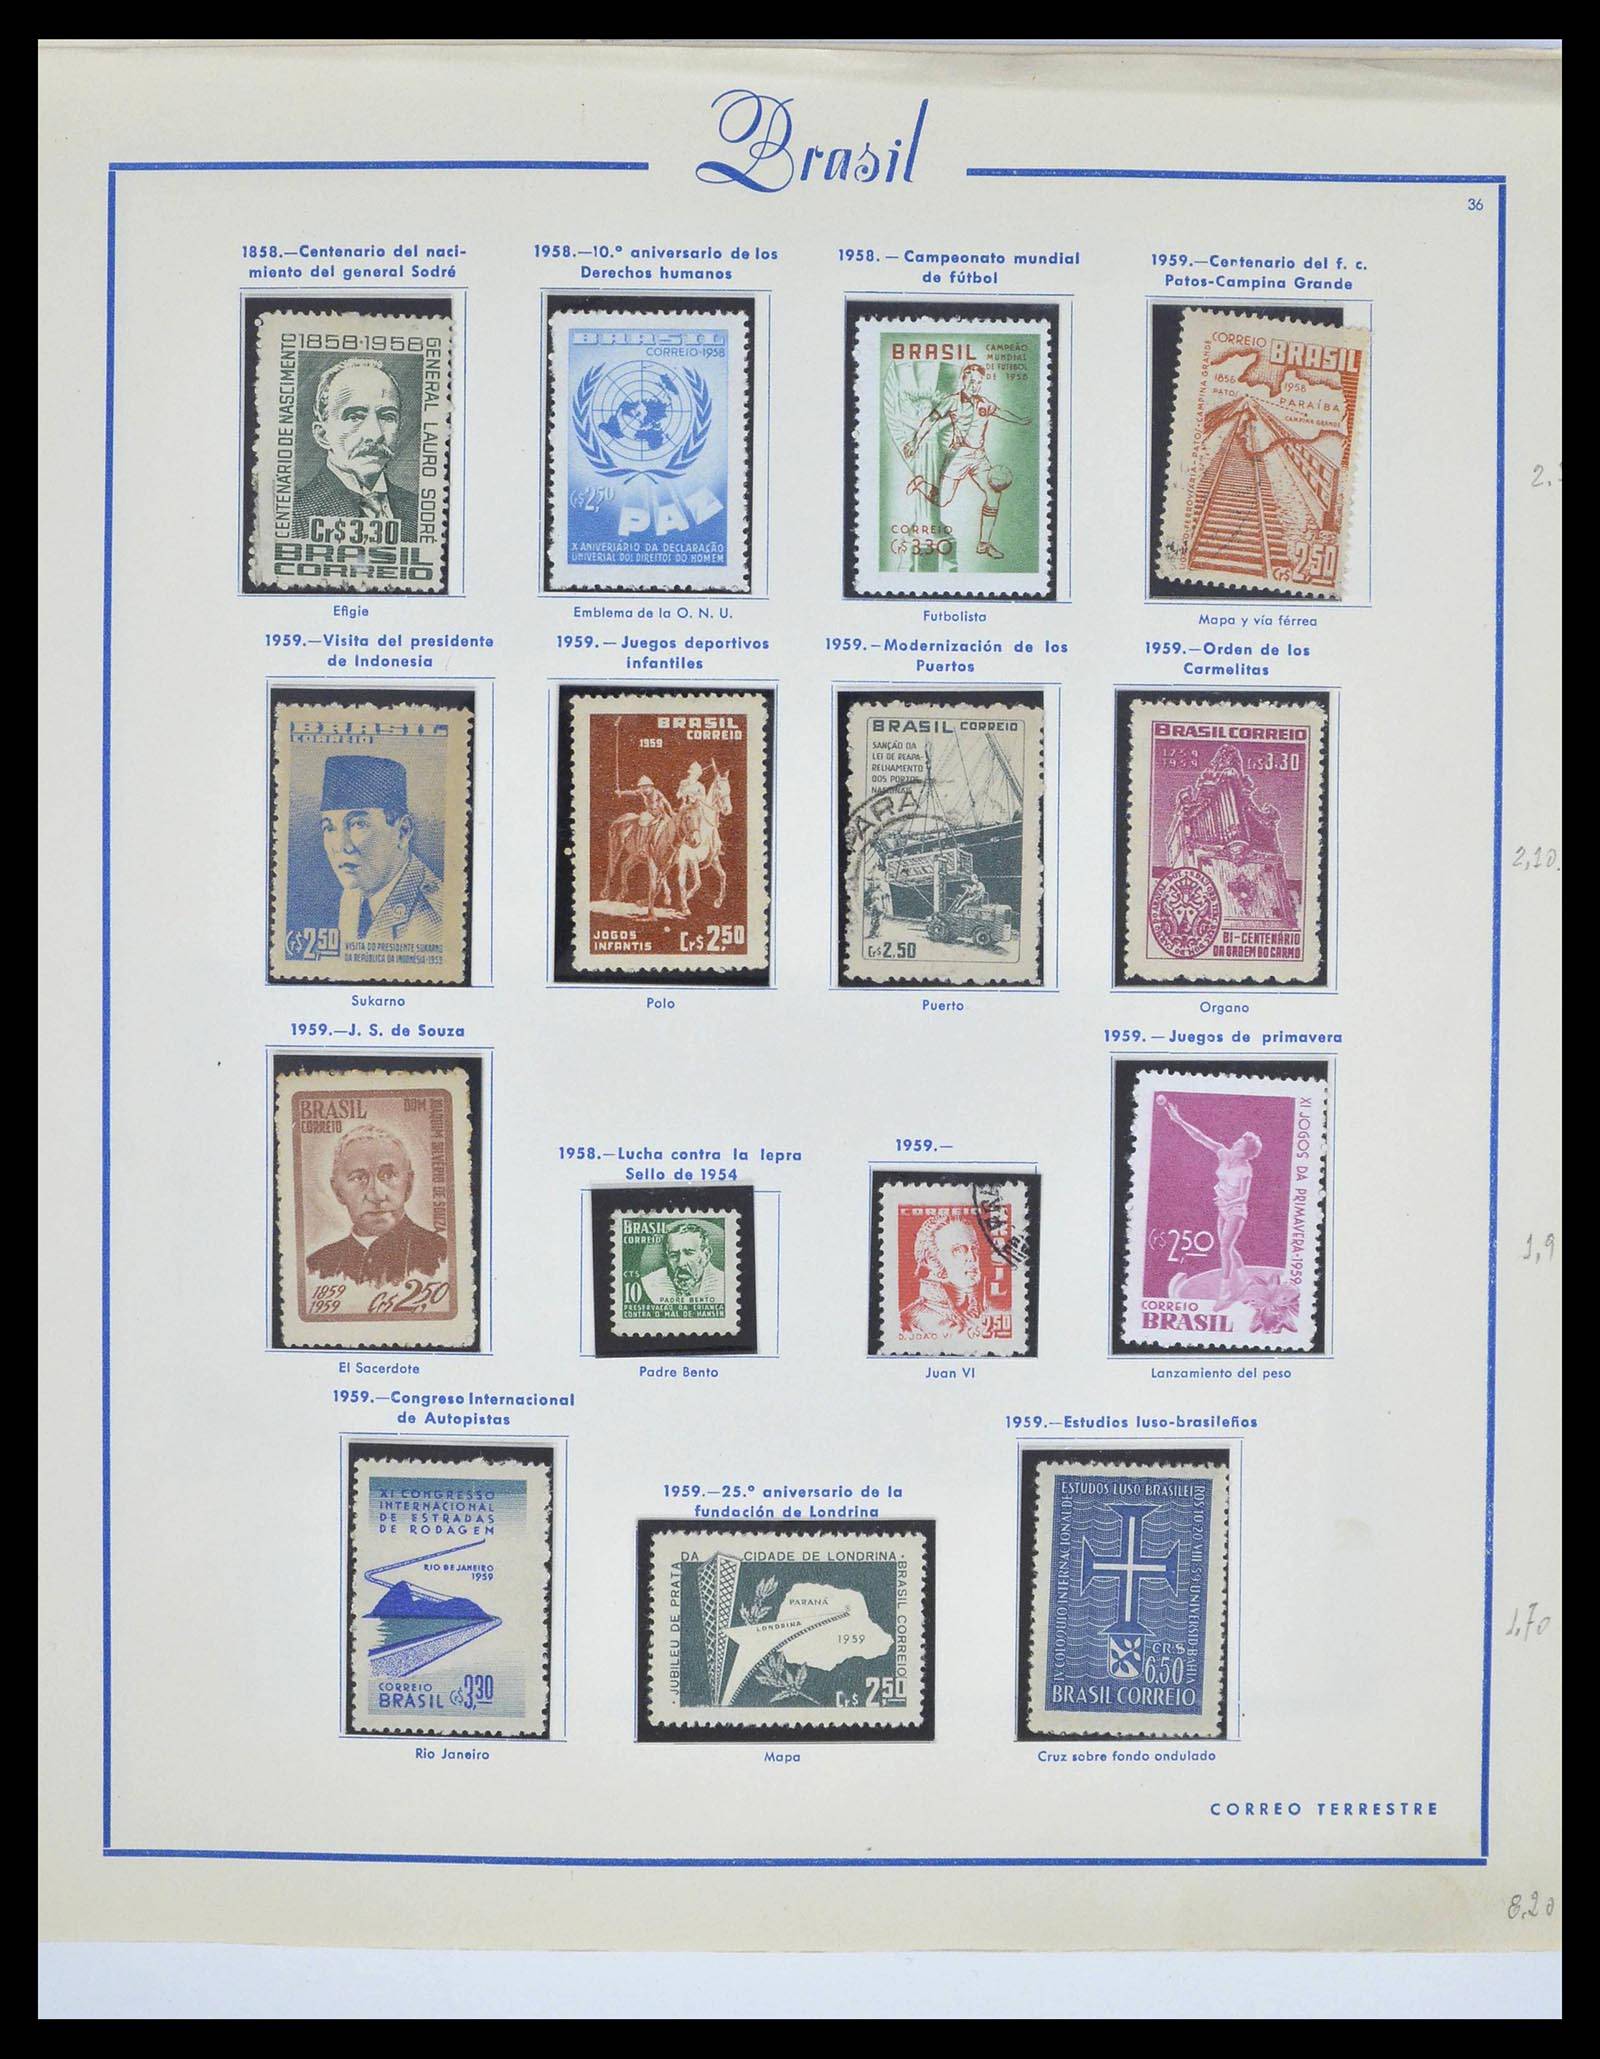 39245 0043 - Stamp collection 39245 Brazil 1843-1968.